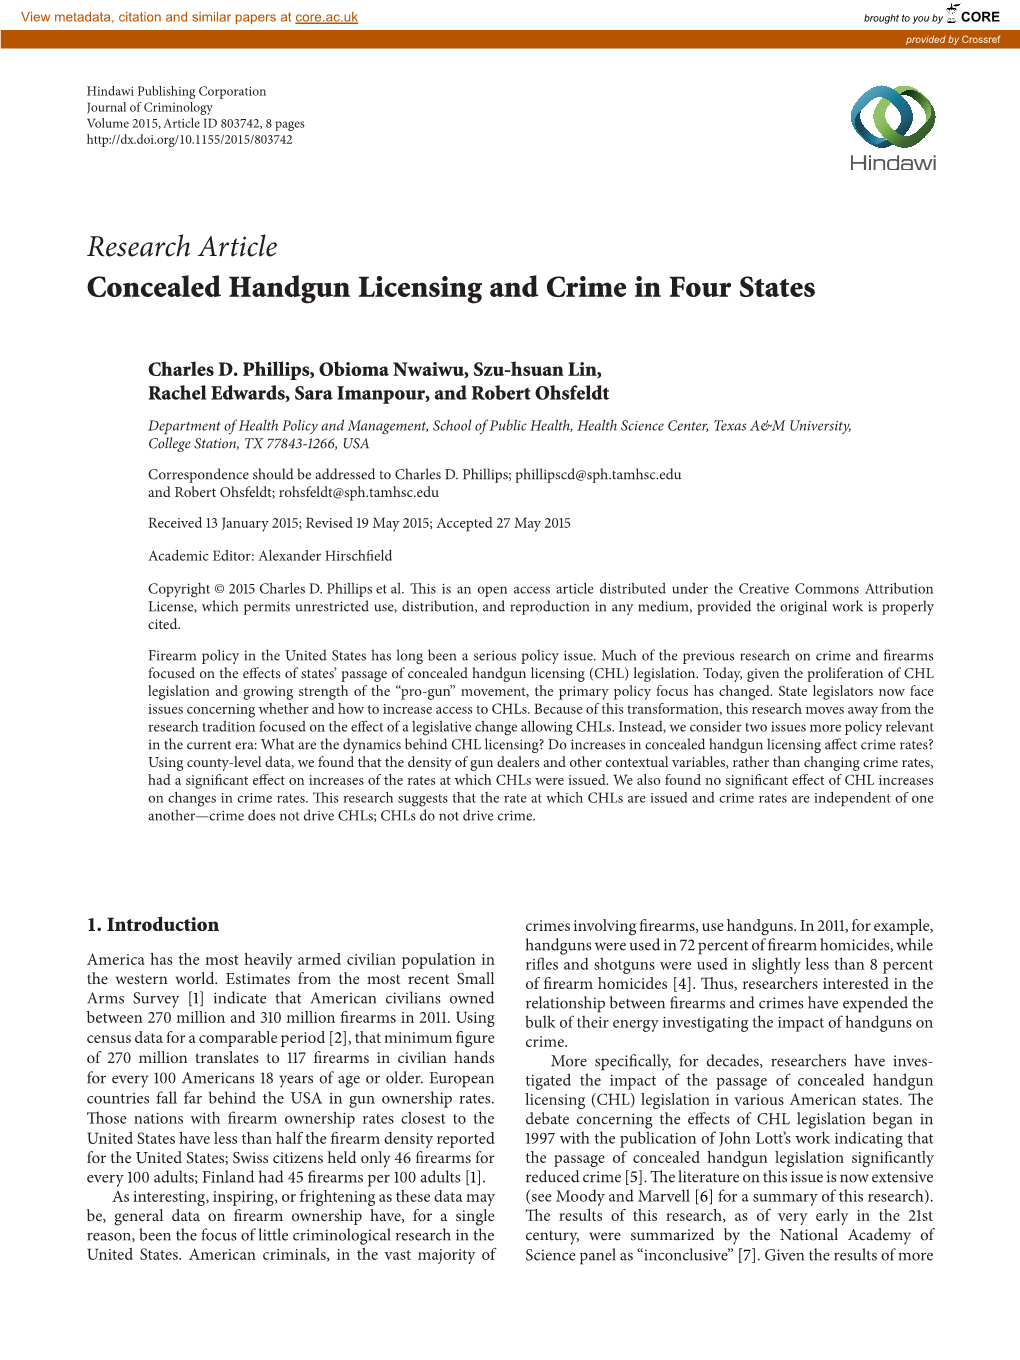 Research Article Concealed Handgun Licensing and Crime in Four States